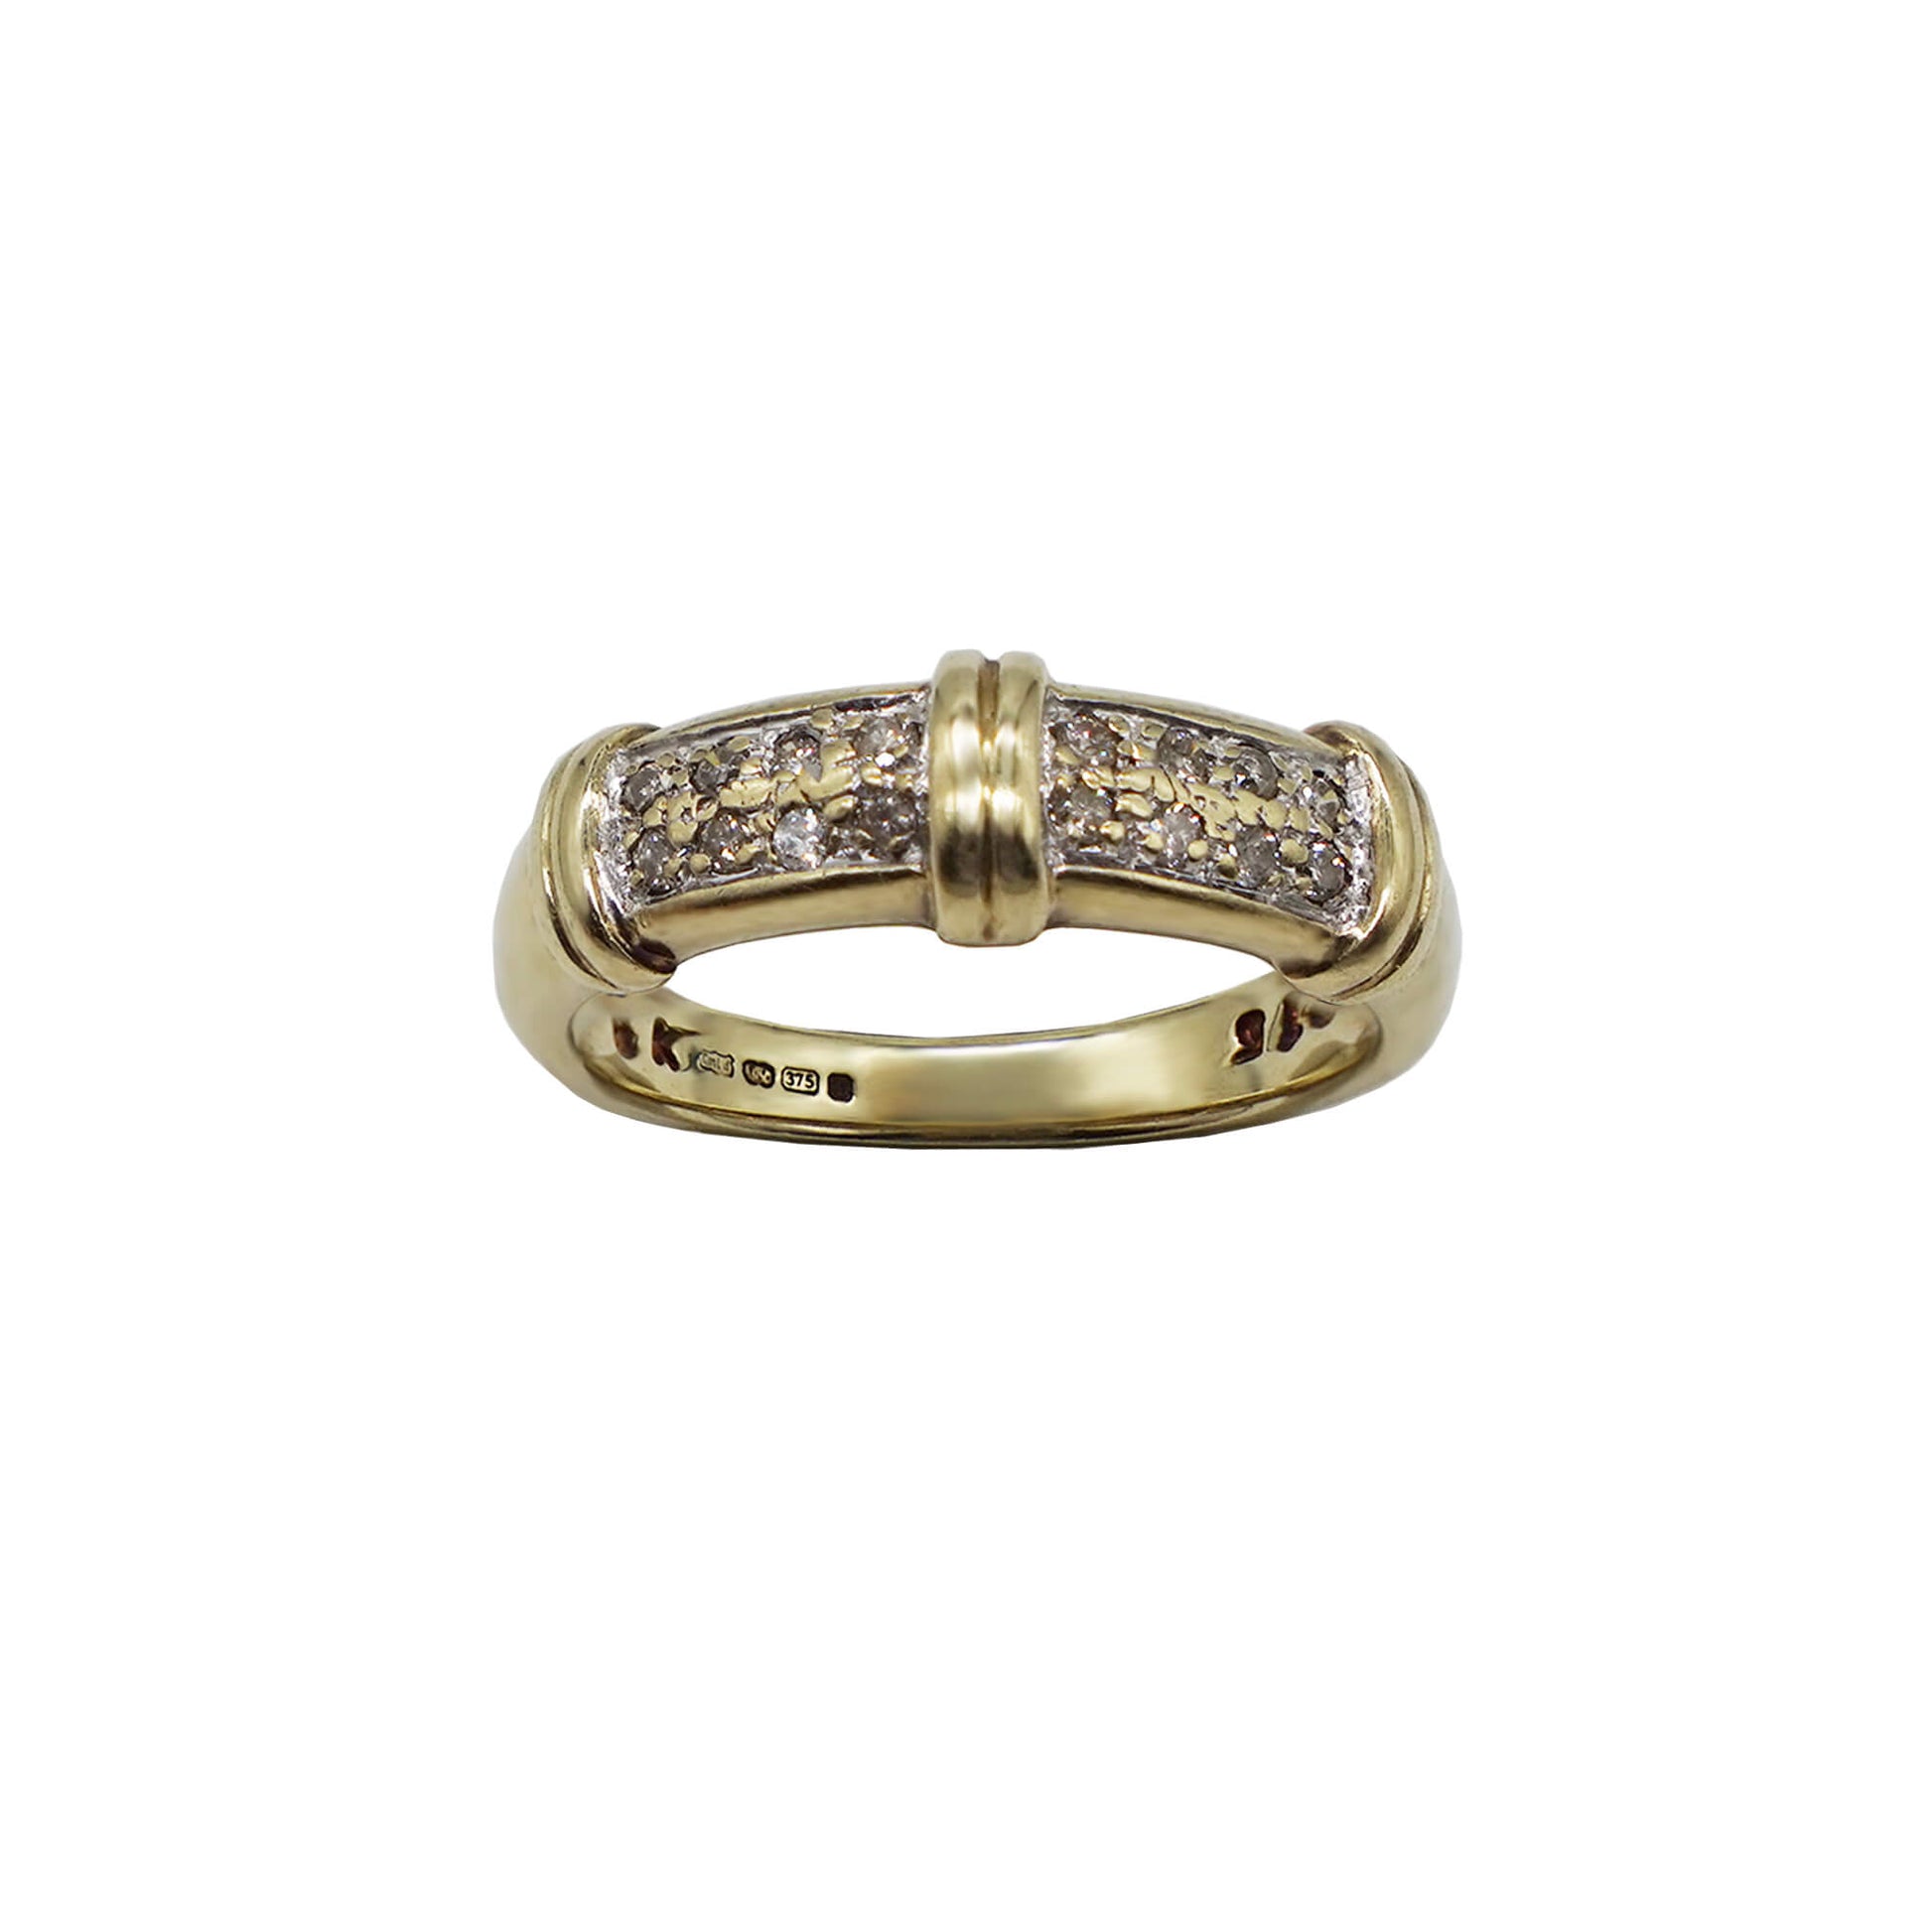 Vintage 9K gold bamboo style band ring with two row diamonds. Hallmarks on inner band.